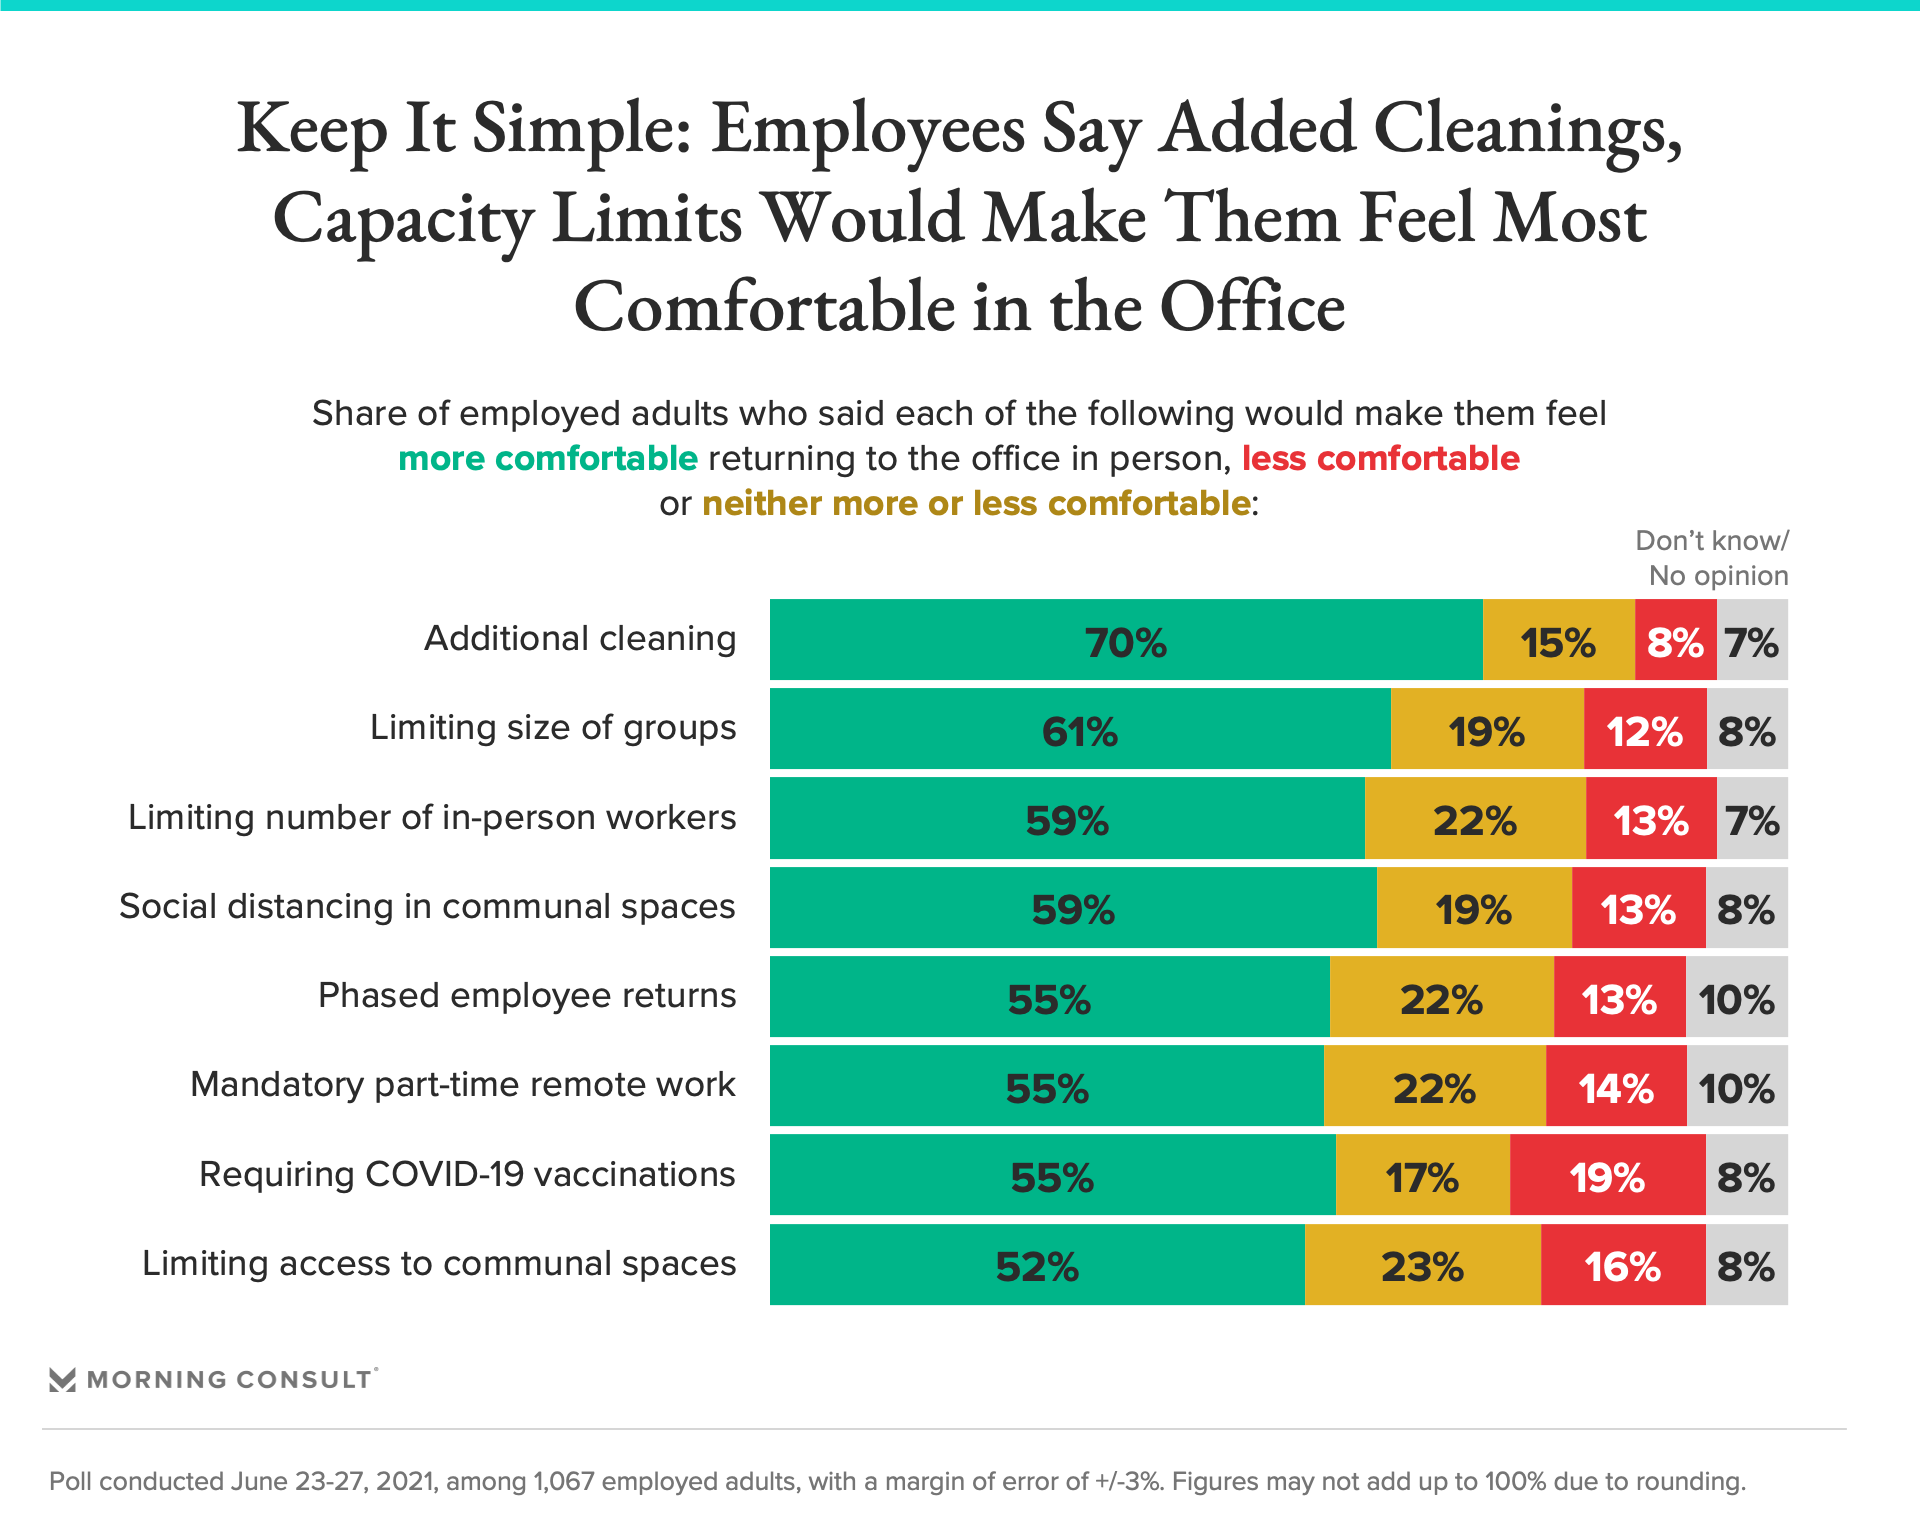 Back to the Office What Businesses Should Know About Employees’ Views